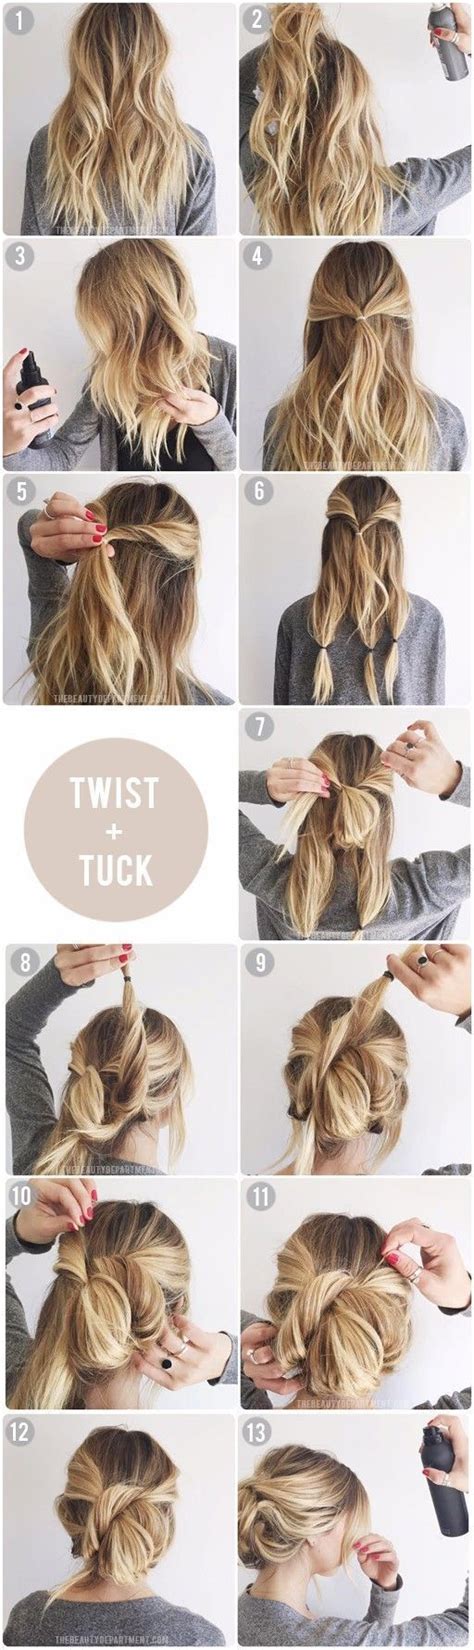 Fresh Cute Simple Ways To Put Your Hair Up Trend This Years Stunning And Glamour Bridal Haircuts